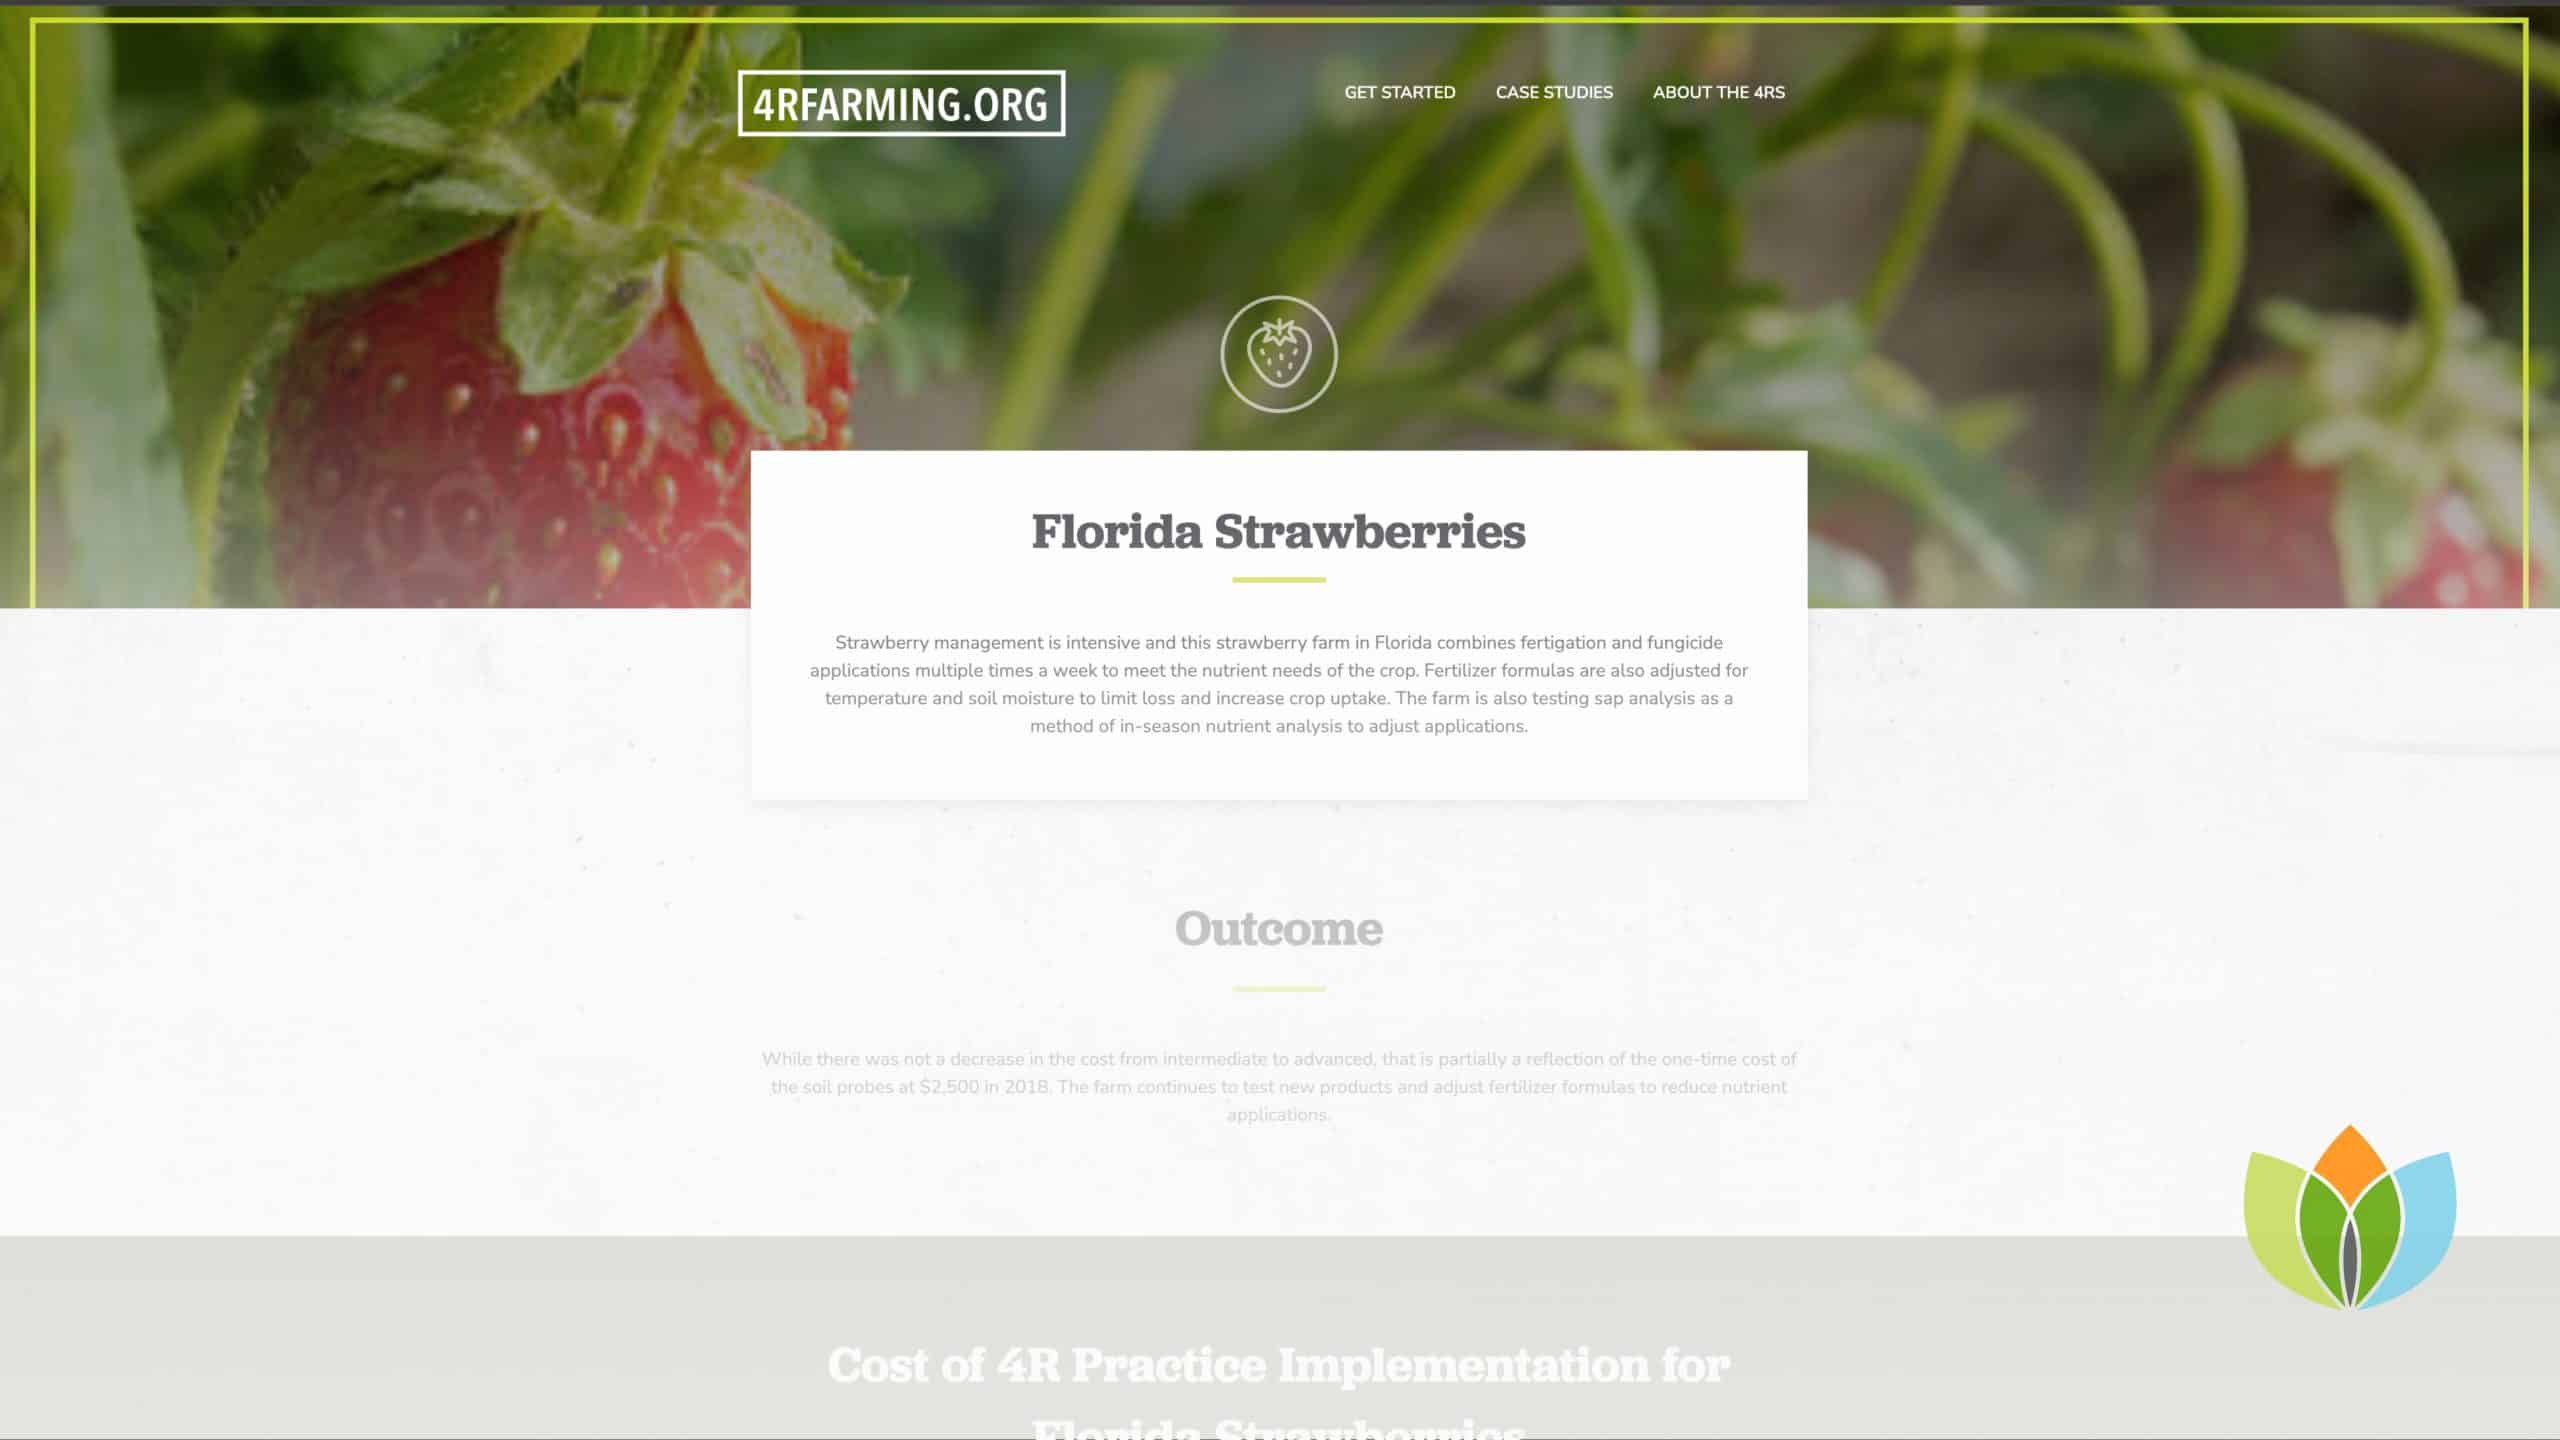 Florida strawberry farm tests advanced 4R practices and products